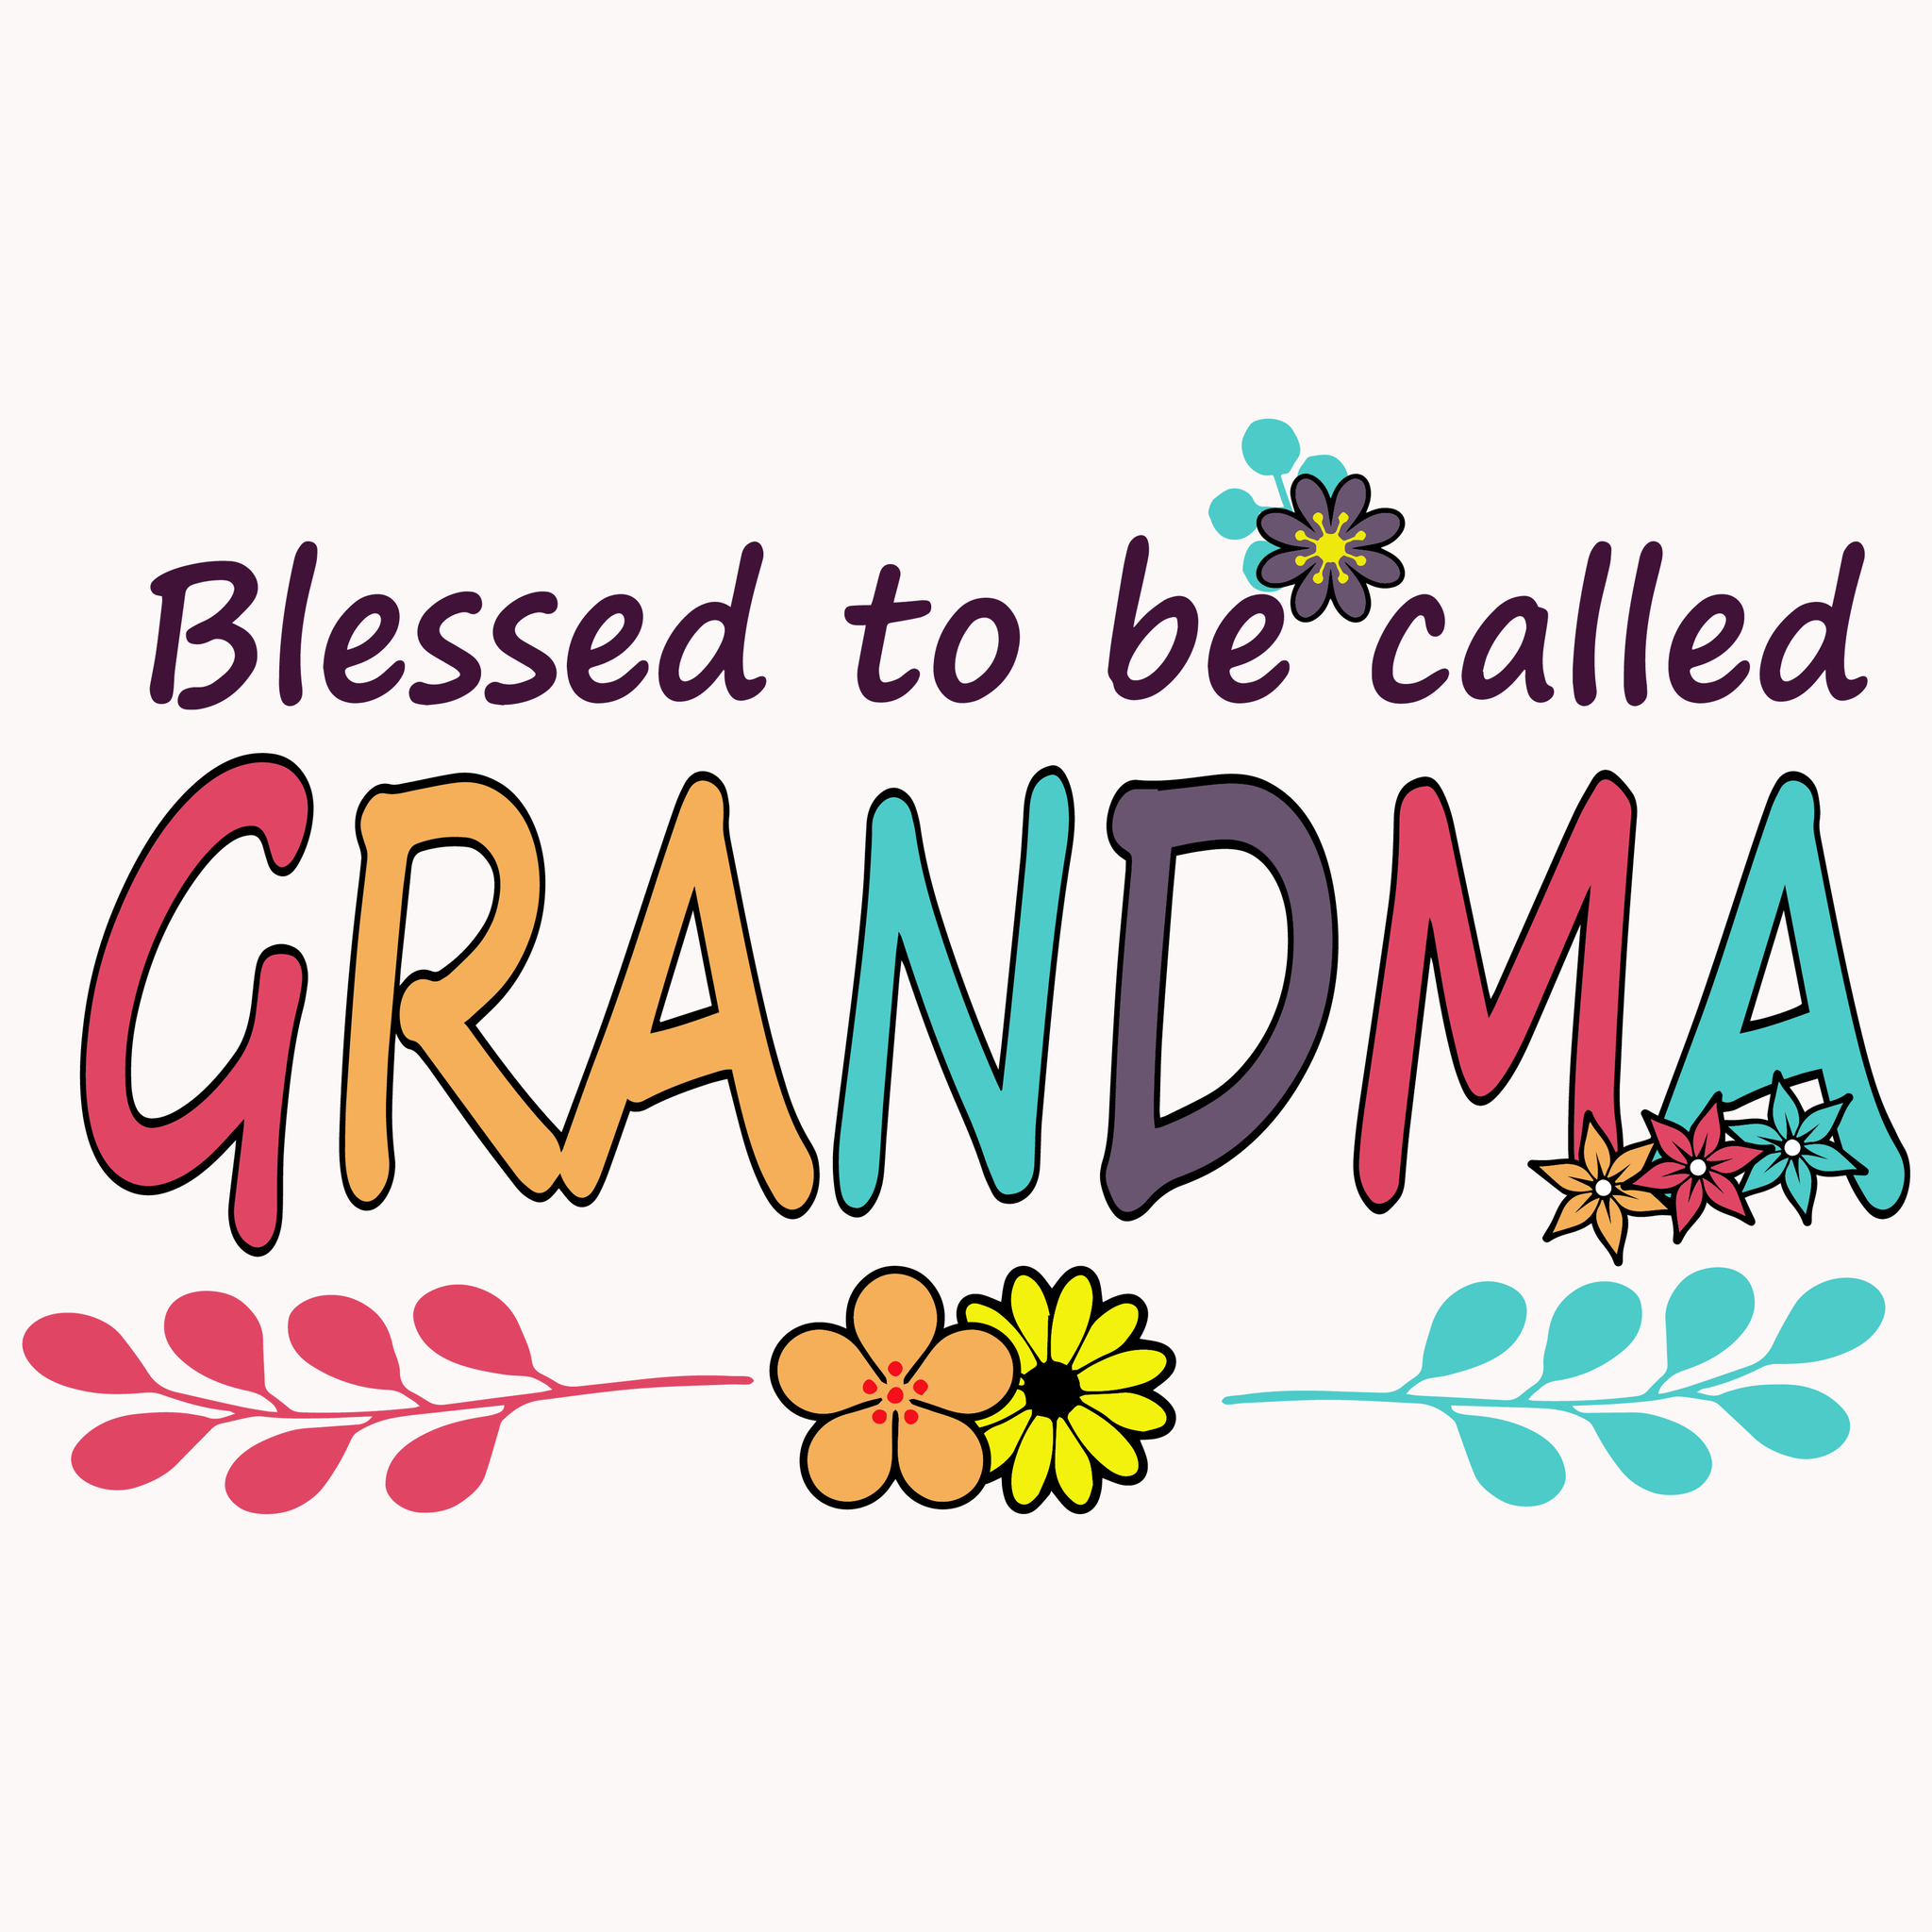 Blessed to be called Grandma svg, Blessed to be called Grandma , Blessed to be called Grandma png, Grandma svg, funny quotes svg